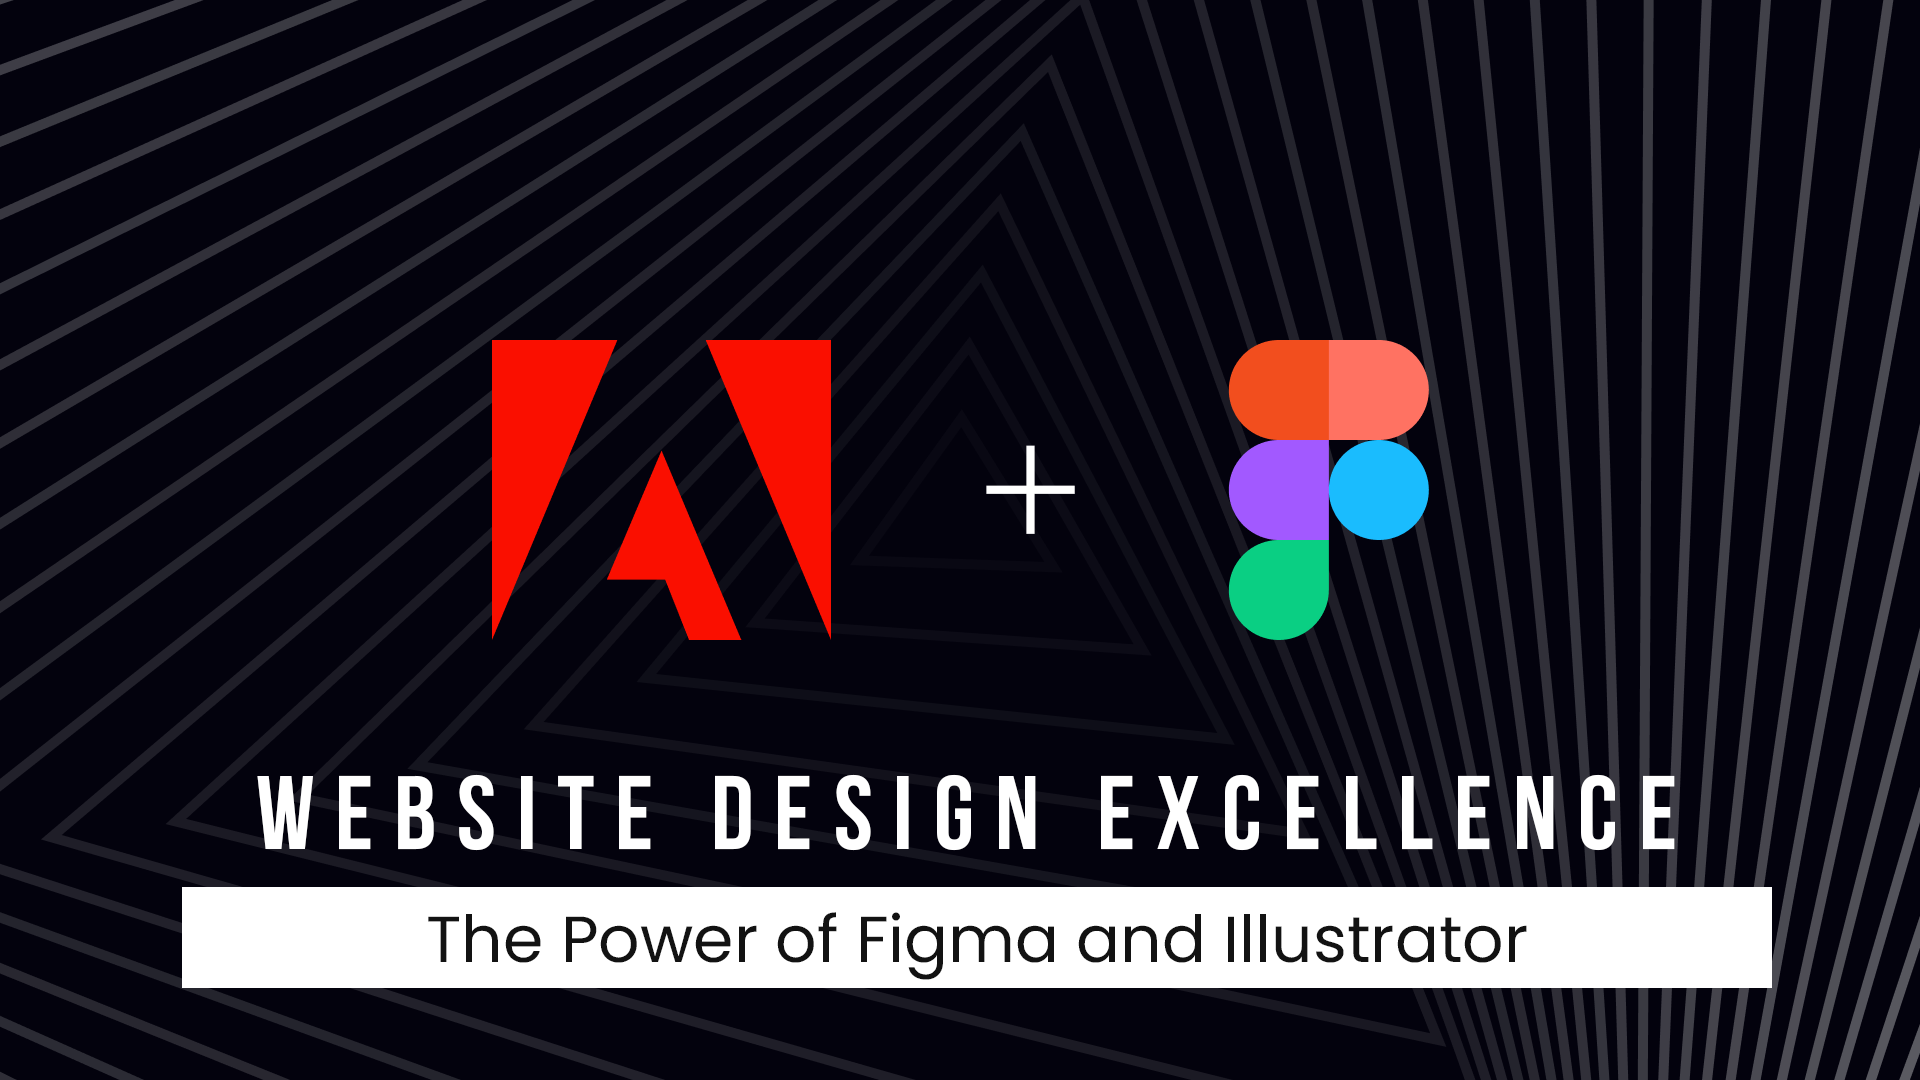 Benefits of using Figma and Illustrator togeather